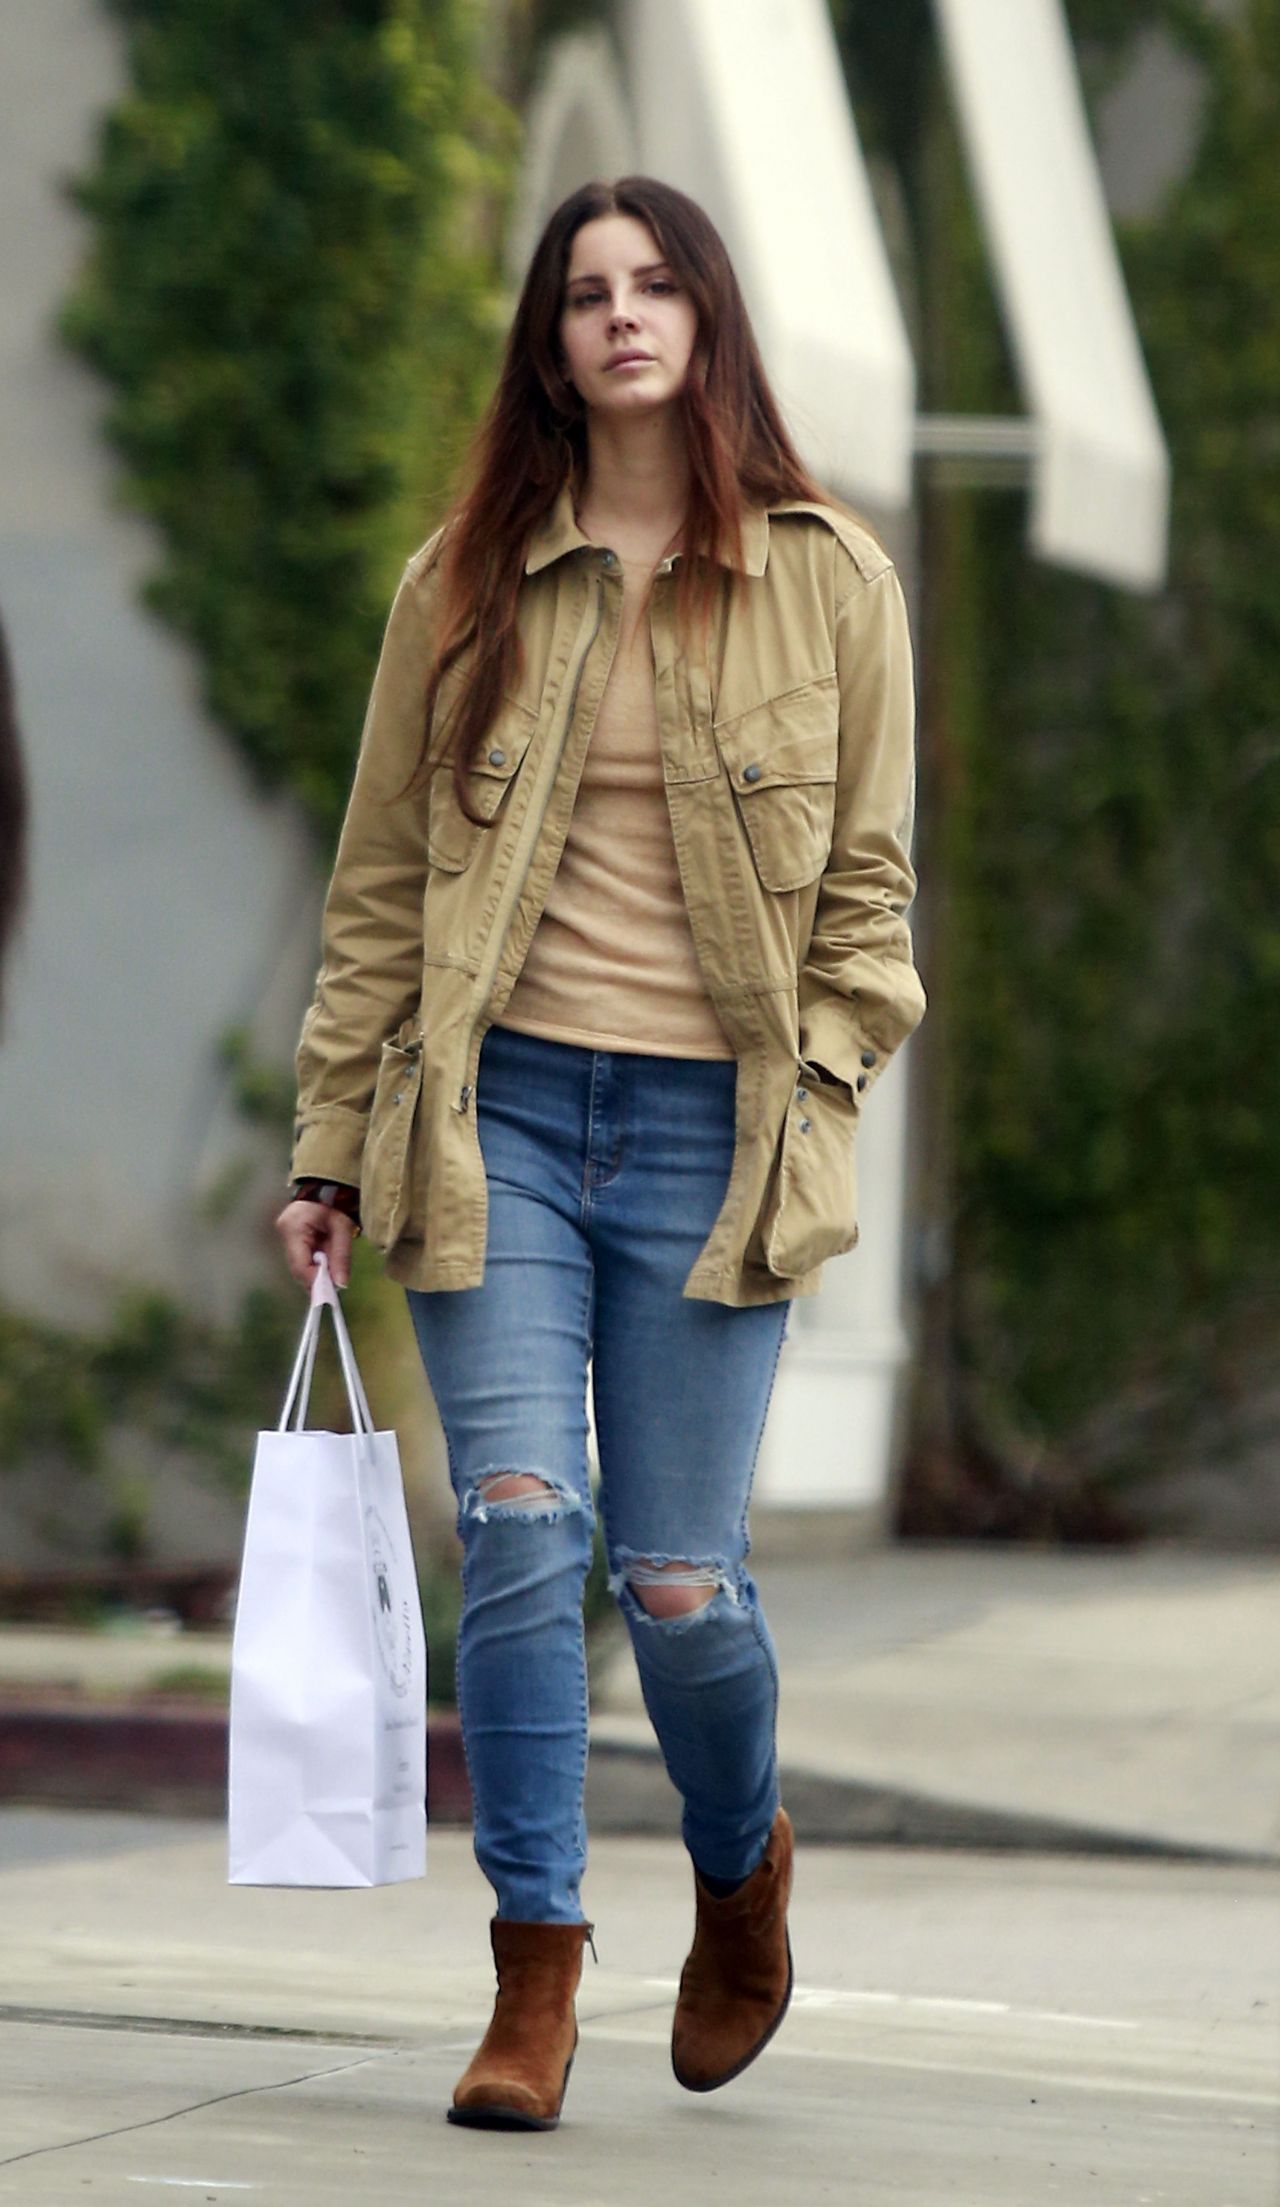 Lana Del Rey - Out in Beverly Hills, CA 2/29/2016 • CelebMafia